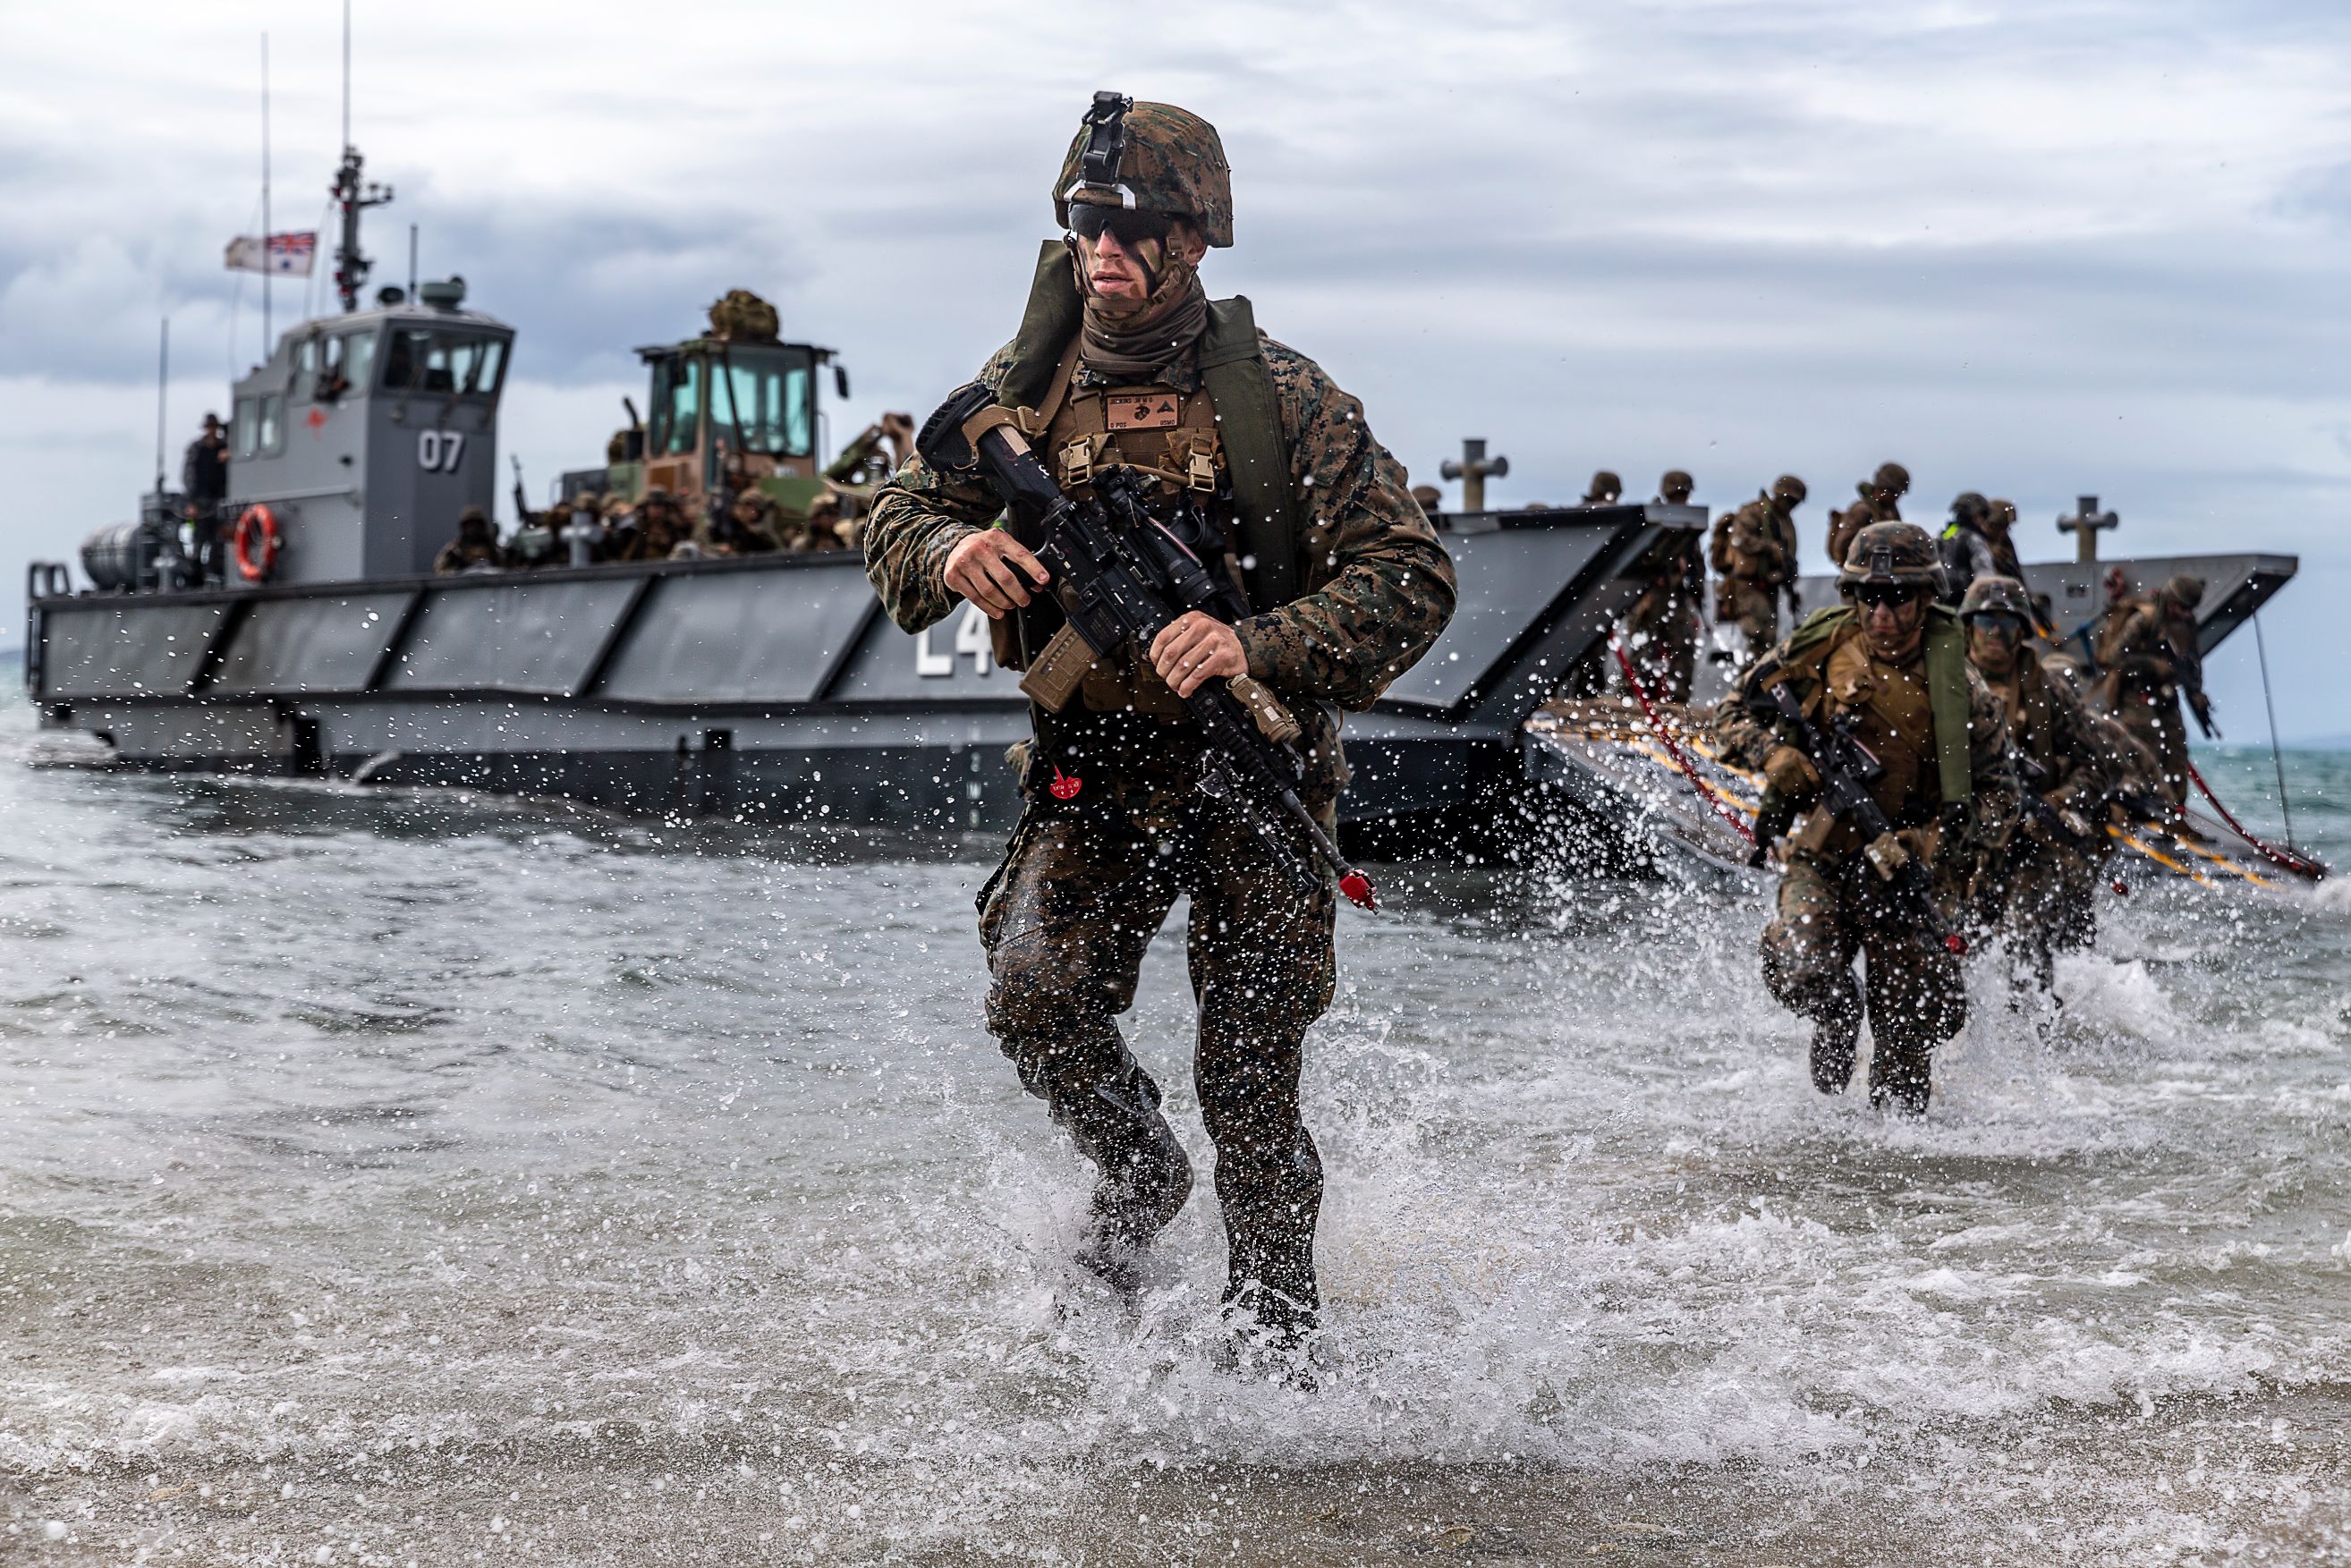 U.S. Marines conduct a simulated amphibious assault of exercise Talisman Sabre 19 in Bowen, Australia, July 22, 2019. Talisman Sabre provides an opportunity to conduct operations in a combined, joint and interagency environment that will increase participating countries' abilities to plan and execute contingency responses, from combat missions to humanitarian assistance efforts. (U.S. Marine Corps photo by Lance Cpl. Tanner D. Lambert)